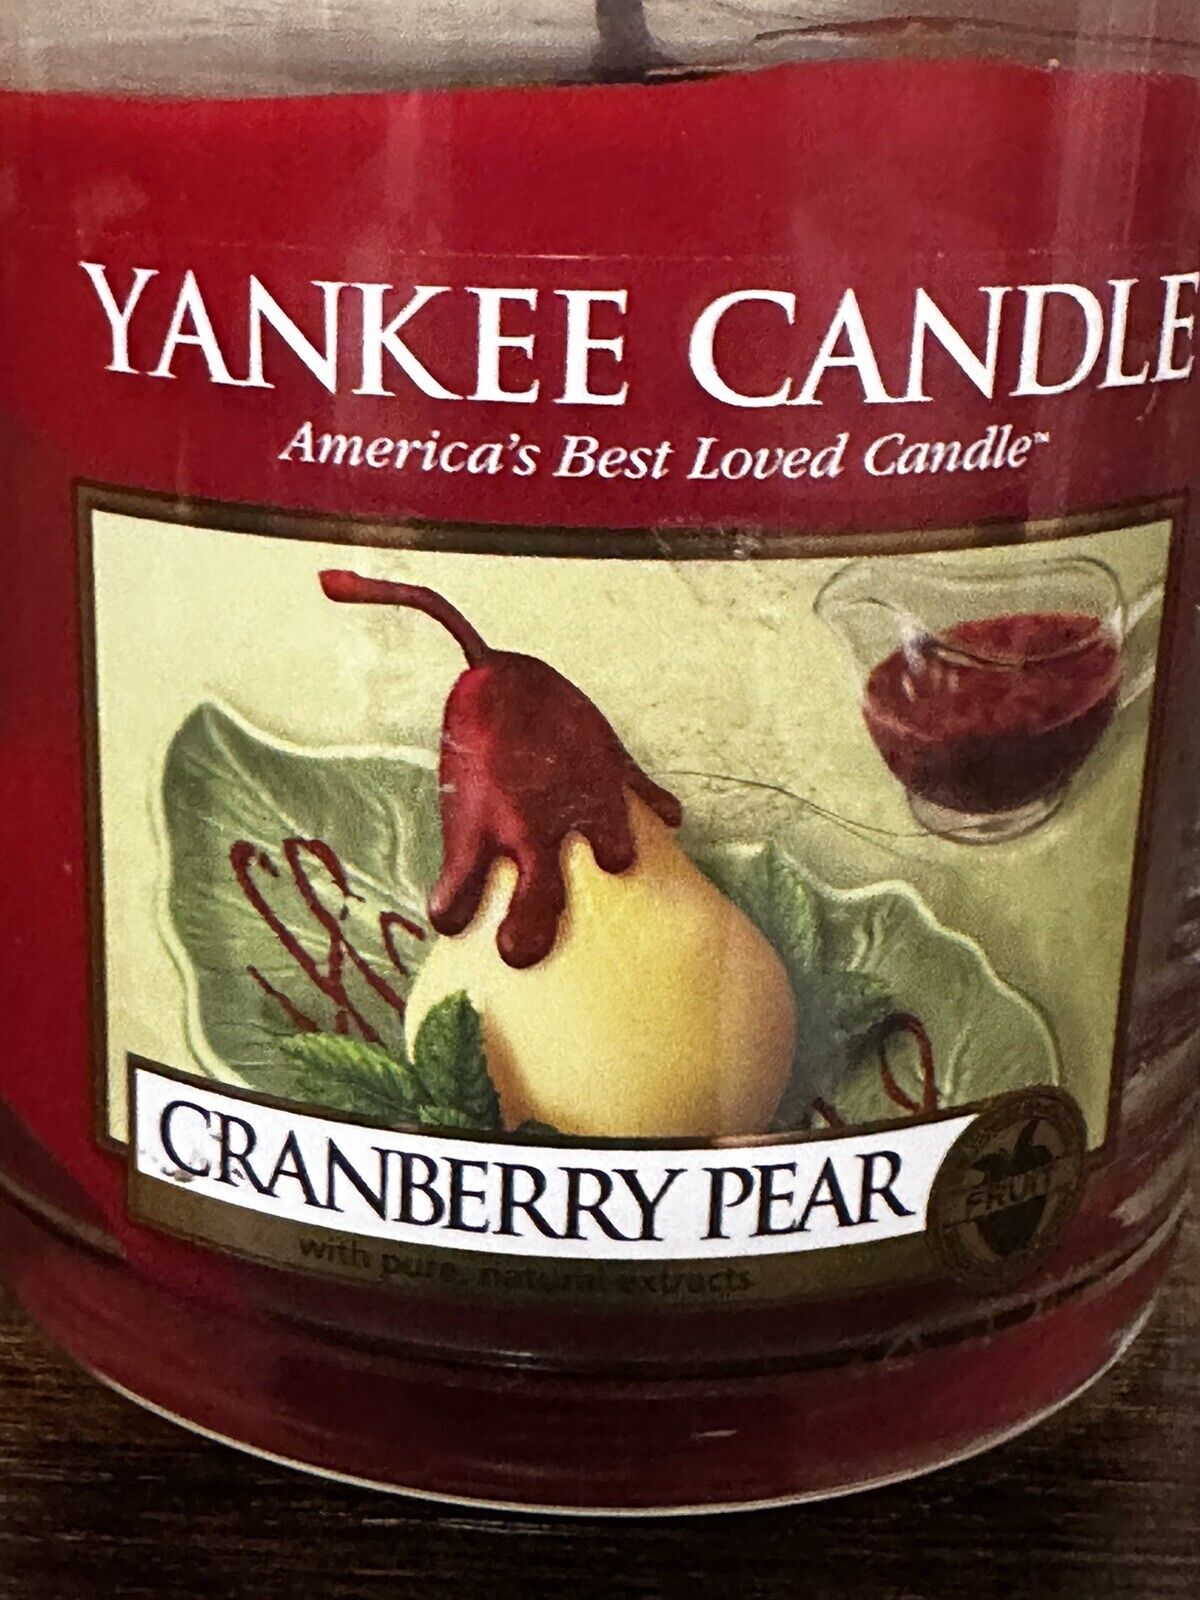 Yankee Candle Cranberry Pear - Retired Scent / Rare~GREAT Fragrance  7 Oz Jar